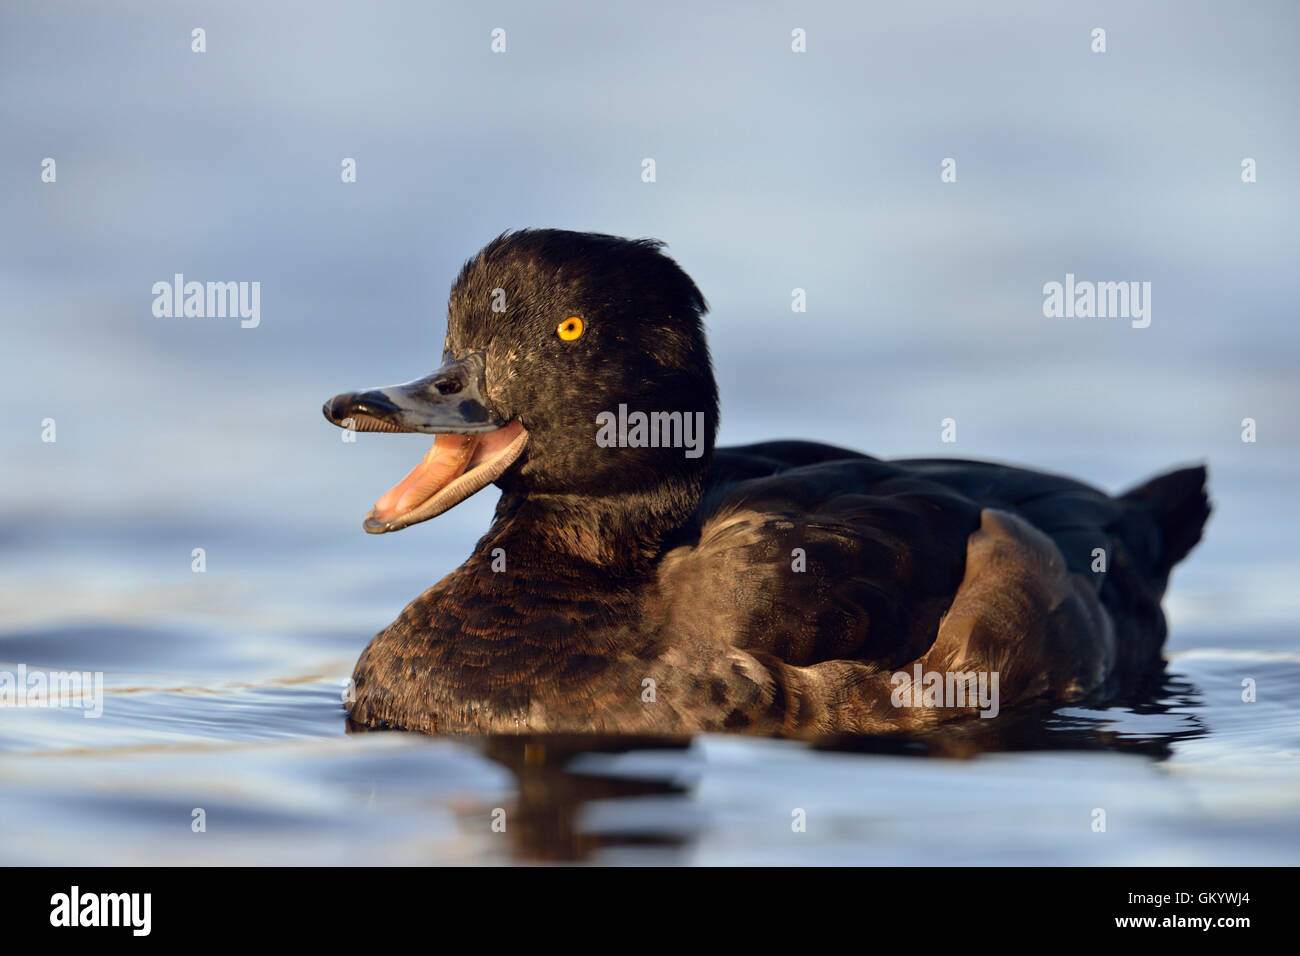 Tufted Duck / Reiherente ( Aythya fuligula ), female, looks quite funny with its wide open beak, looks like laughing. Stock Photo